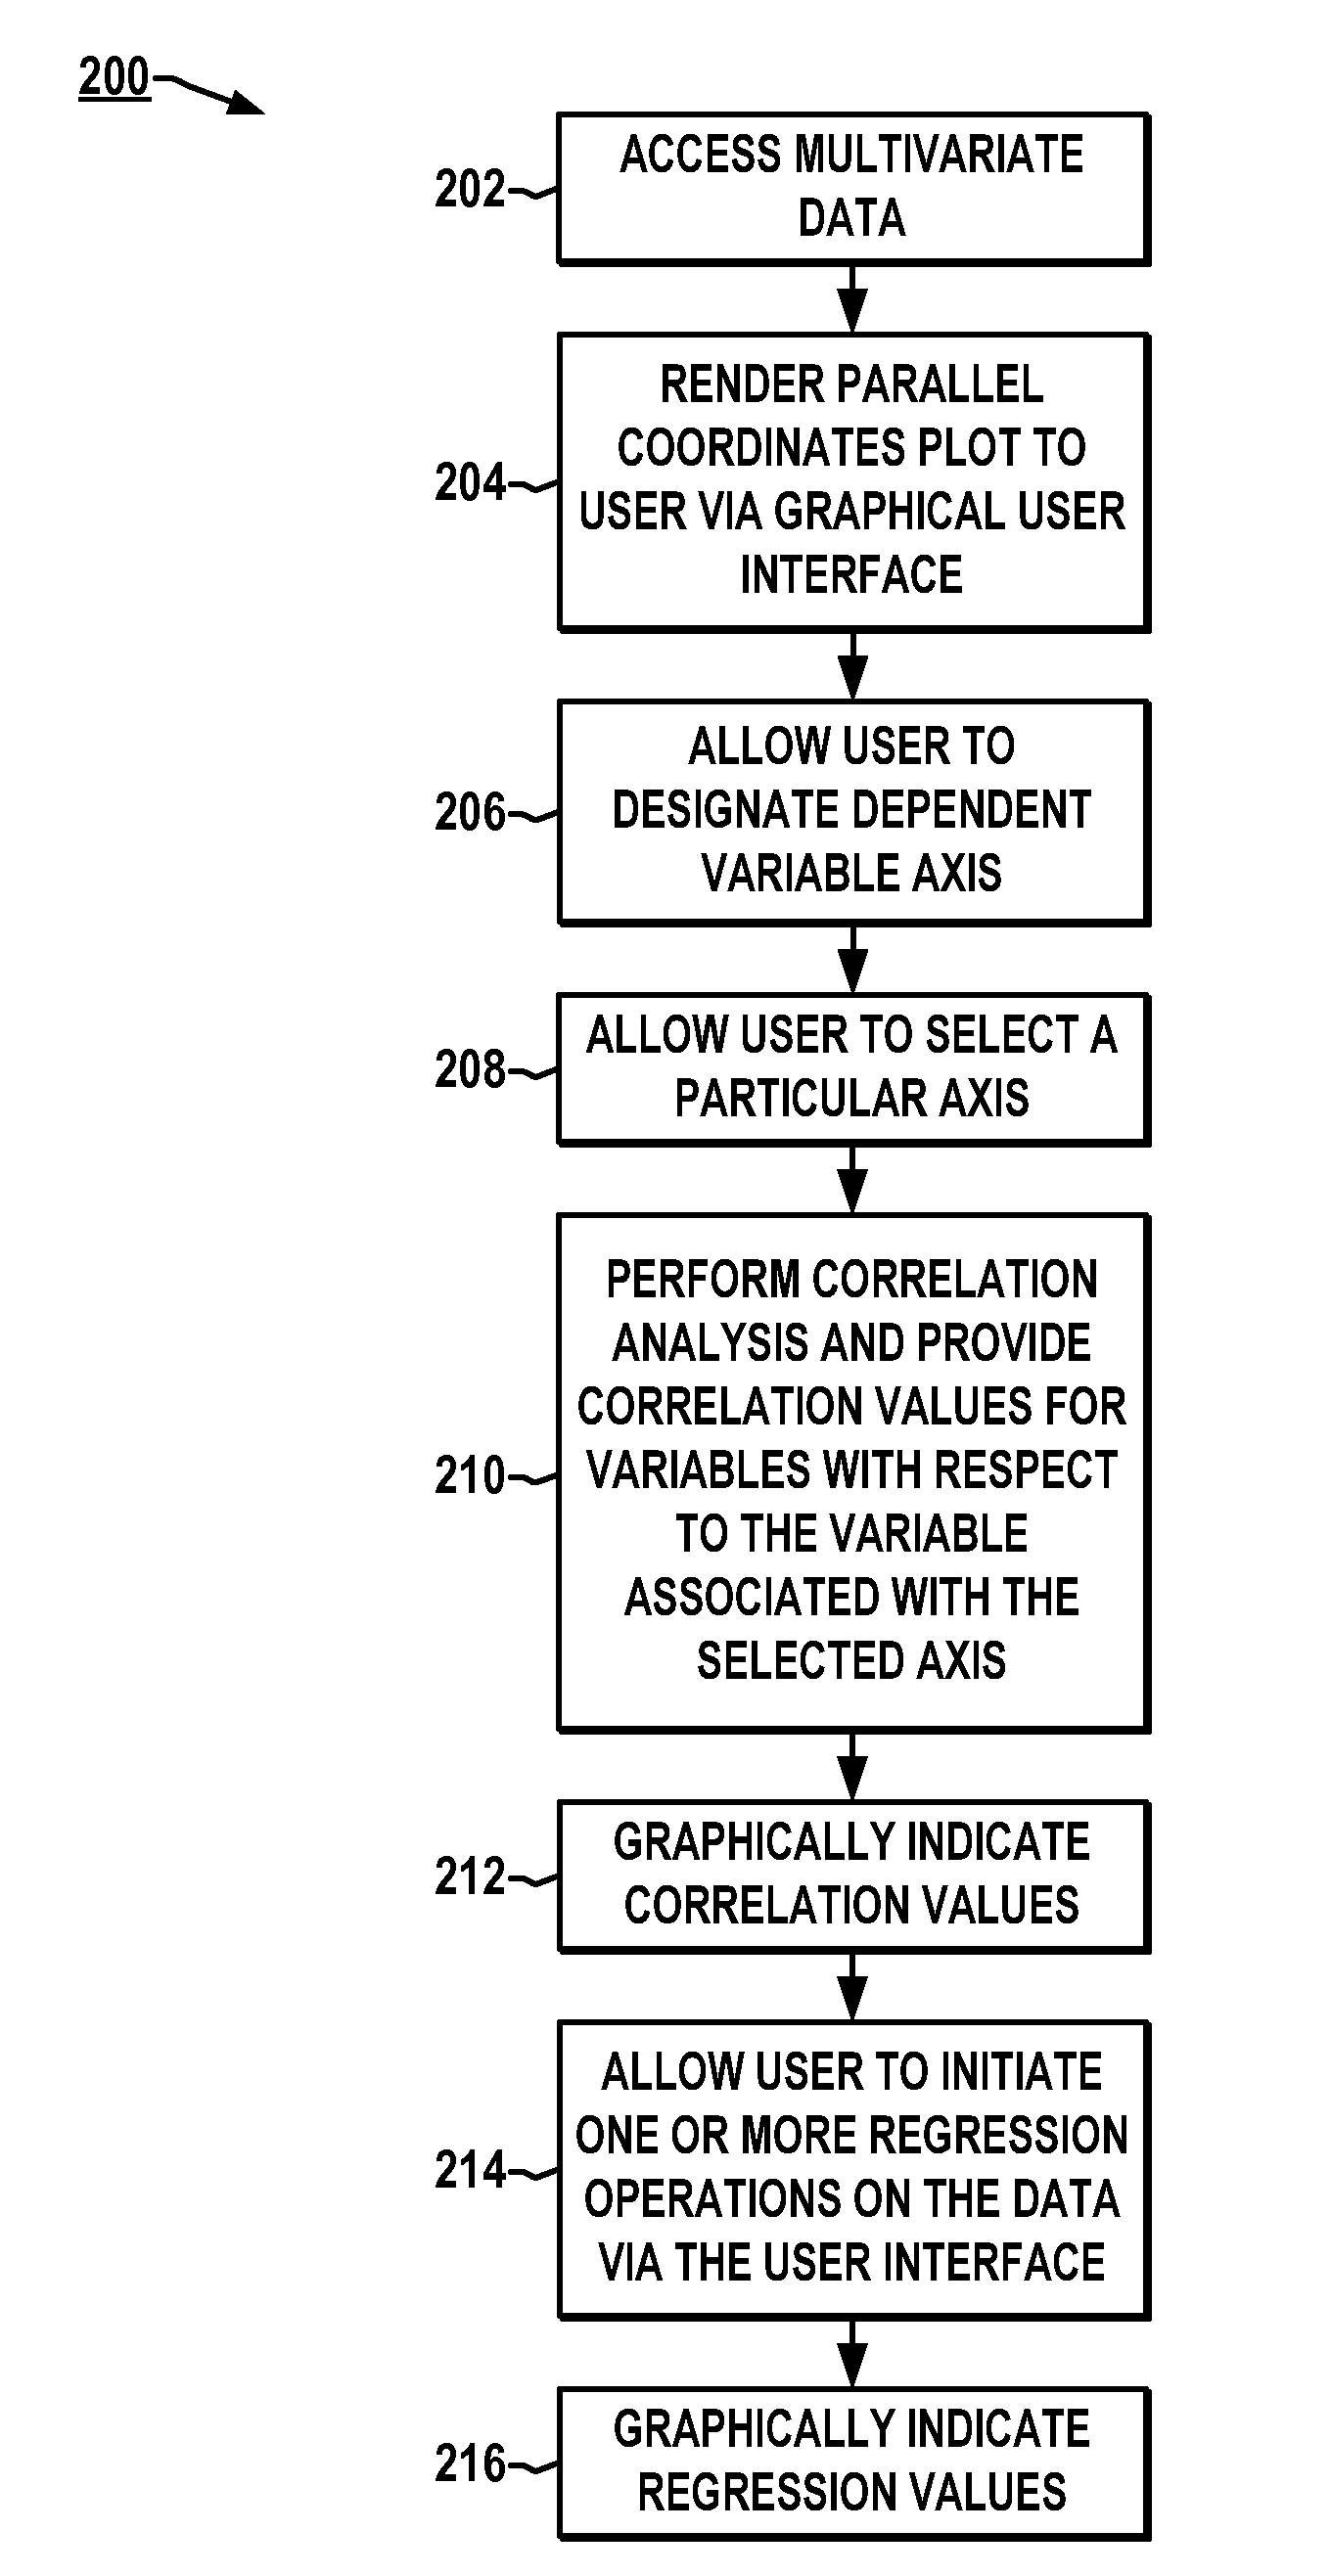 Information Assisted Visual Interface, System, and Method for Identifying and Quantifying Multivariate Associations